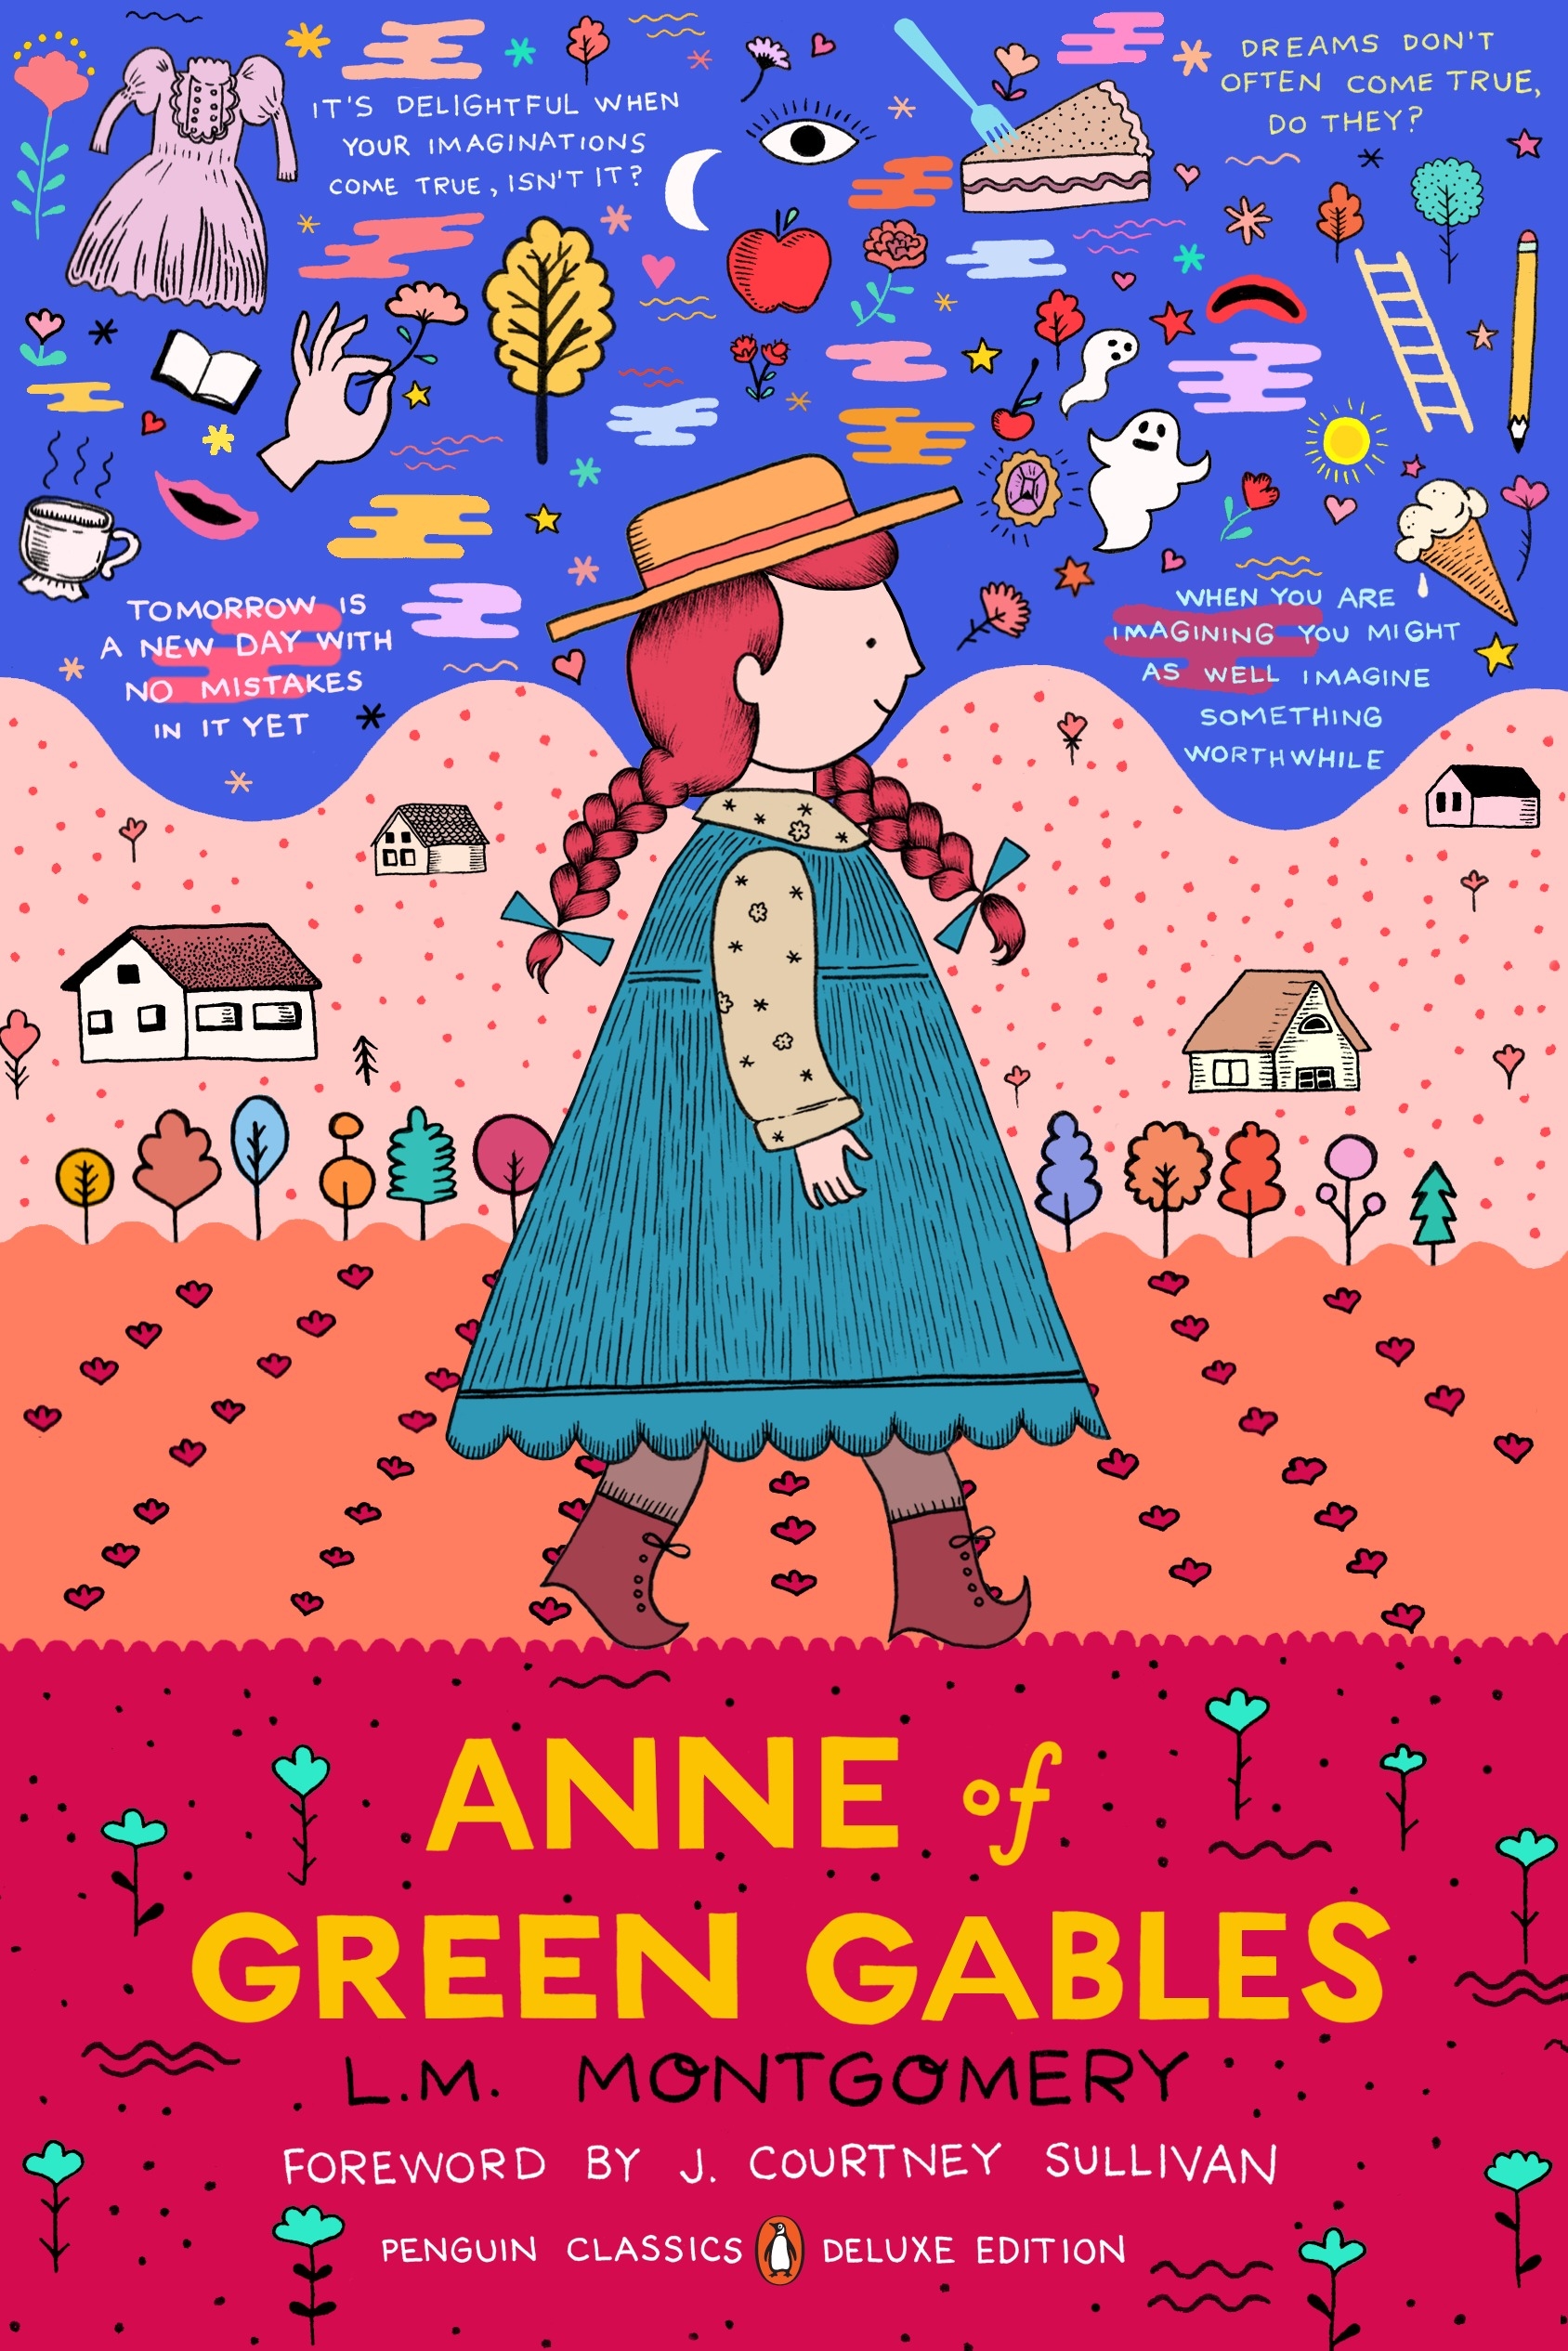 book report on anne of green gables